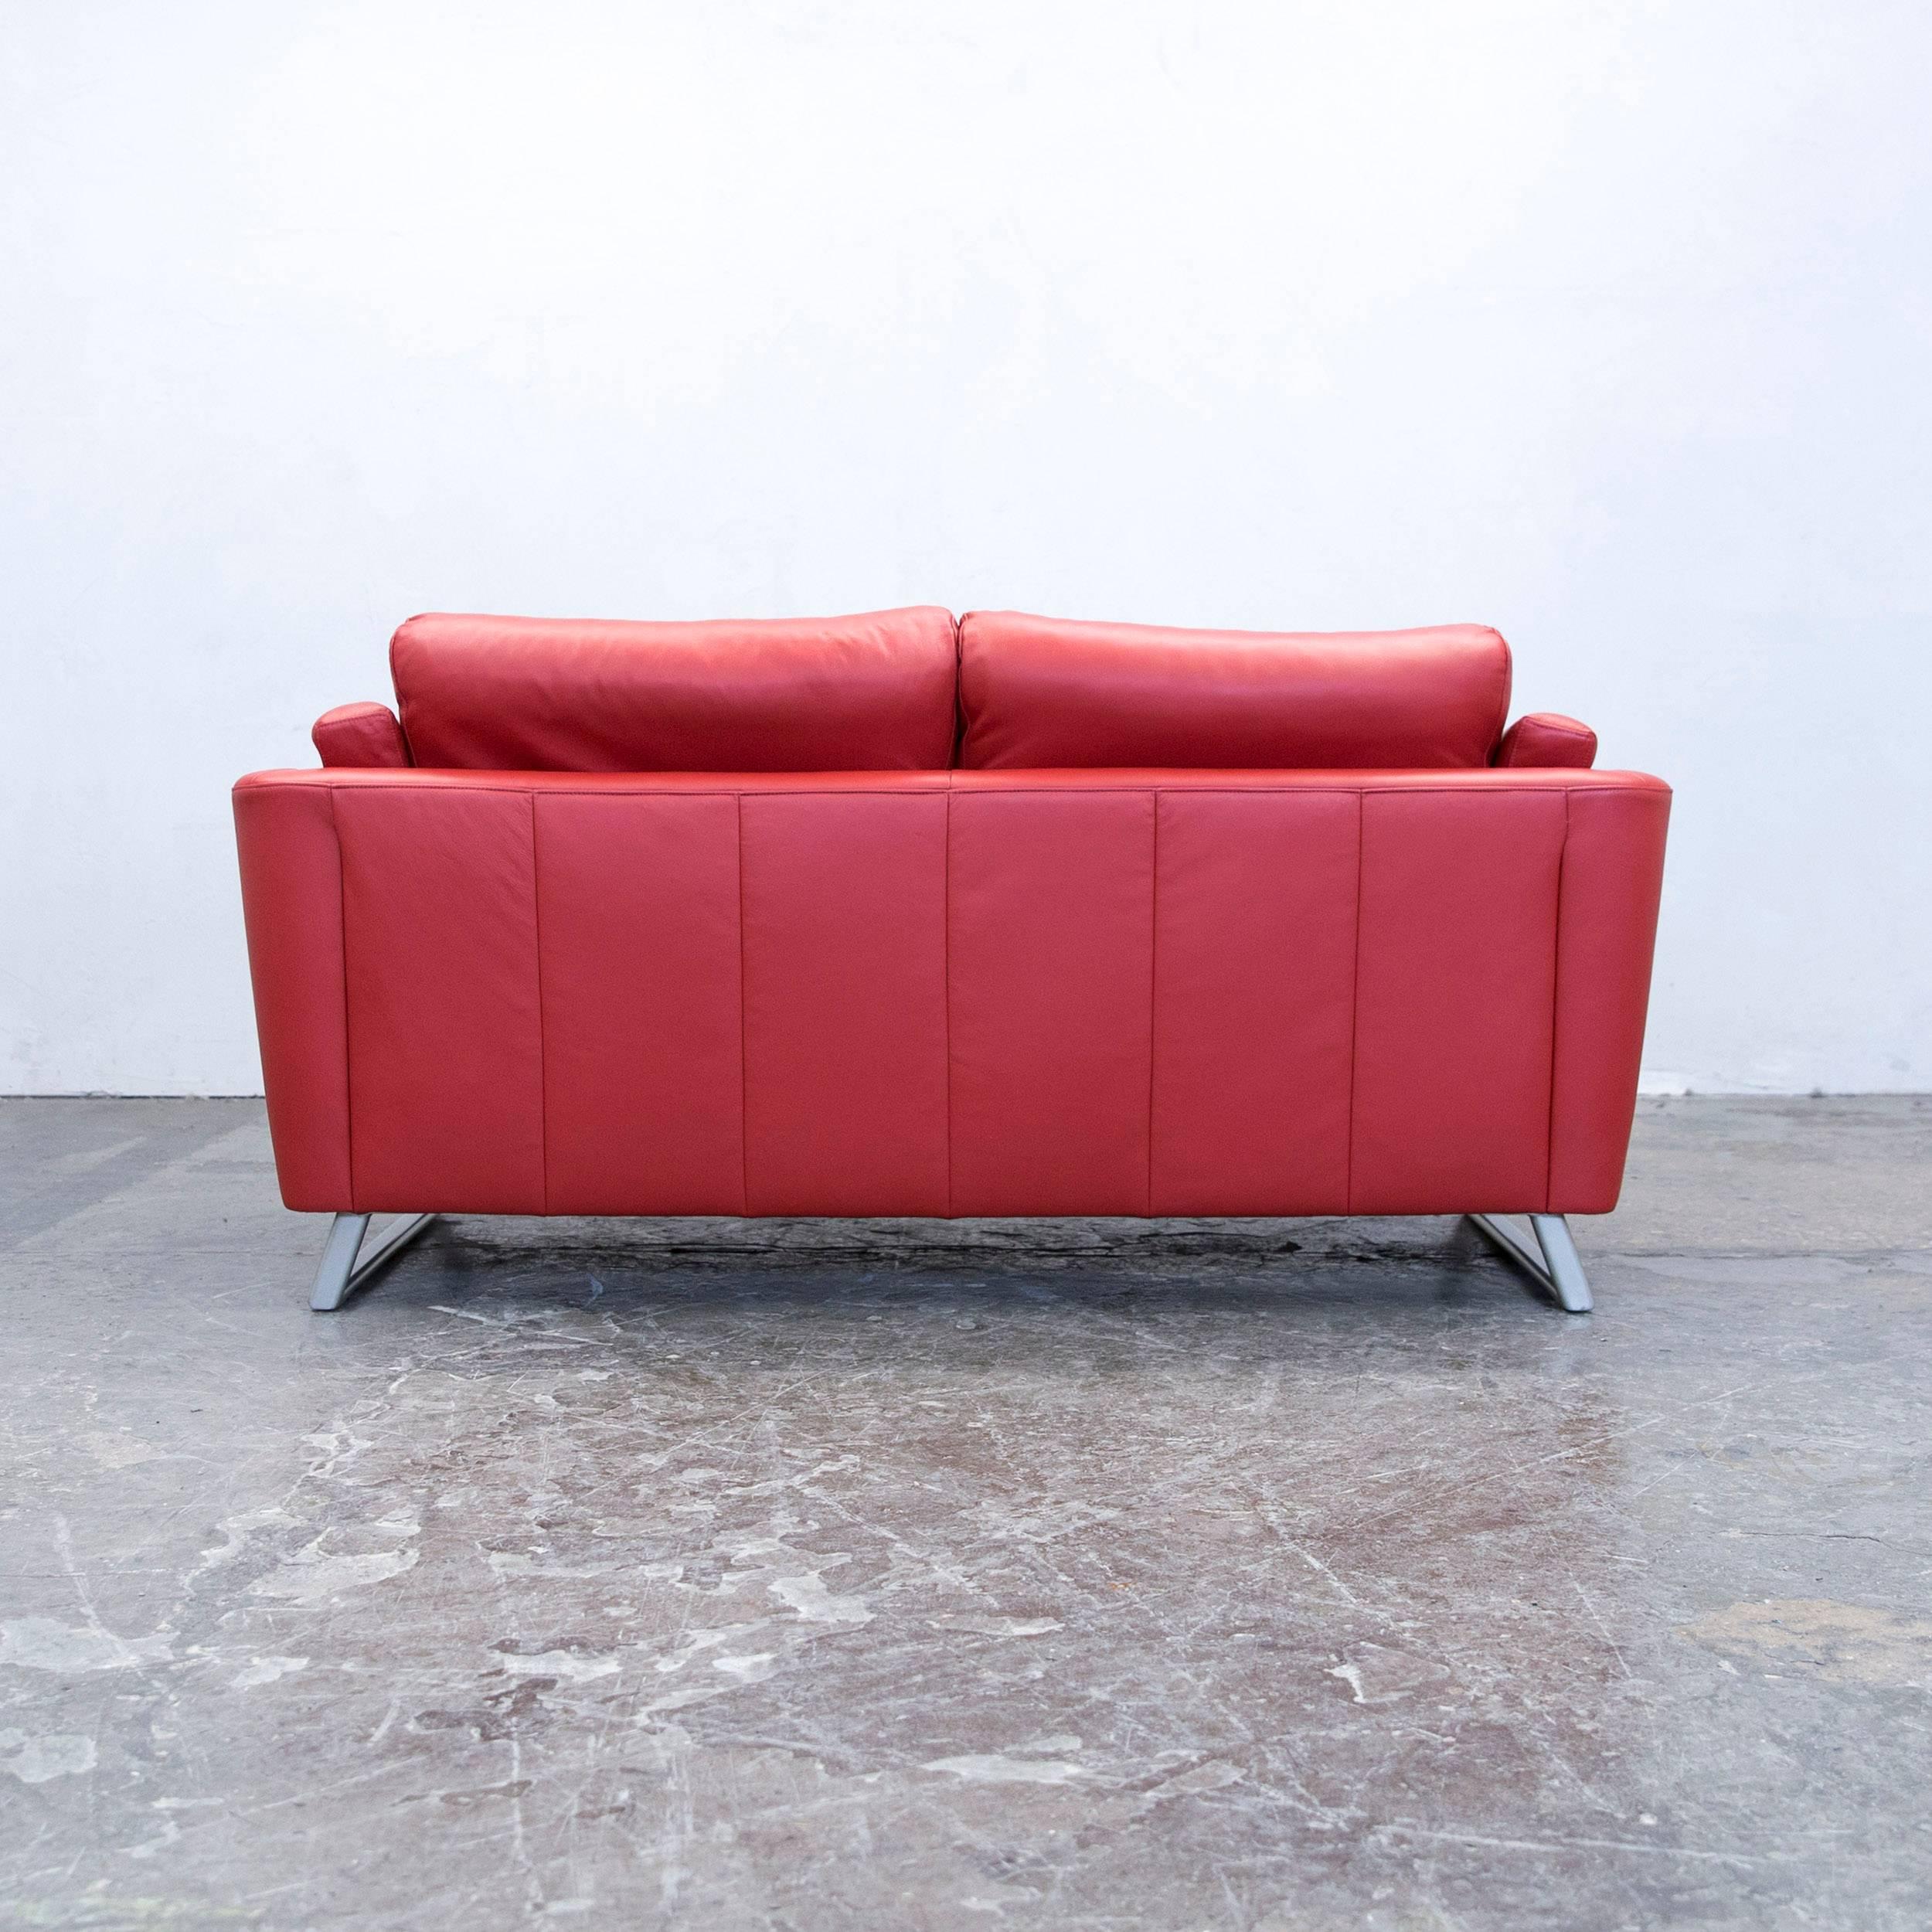 Designer Sofa Leather Red Two-Seat Couch Modern 4